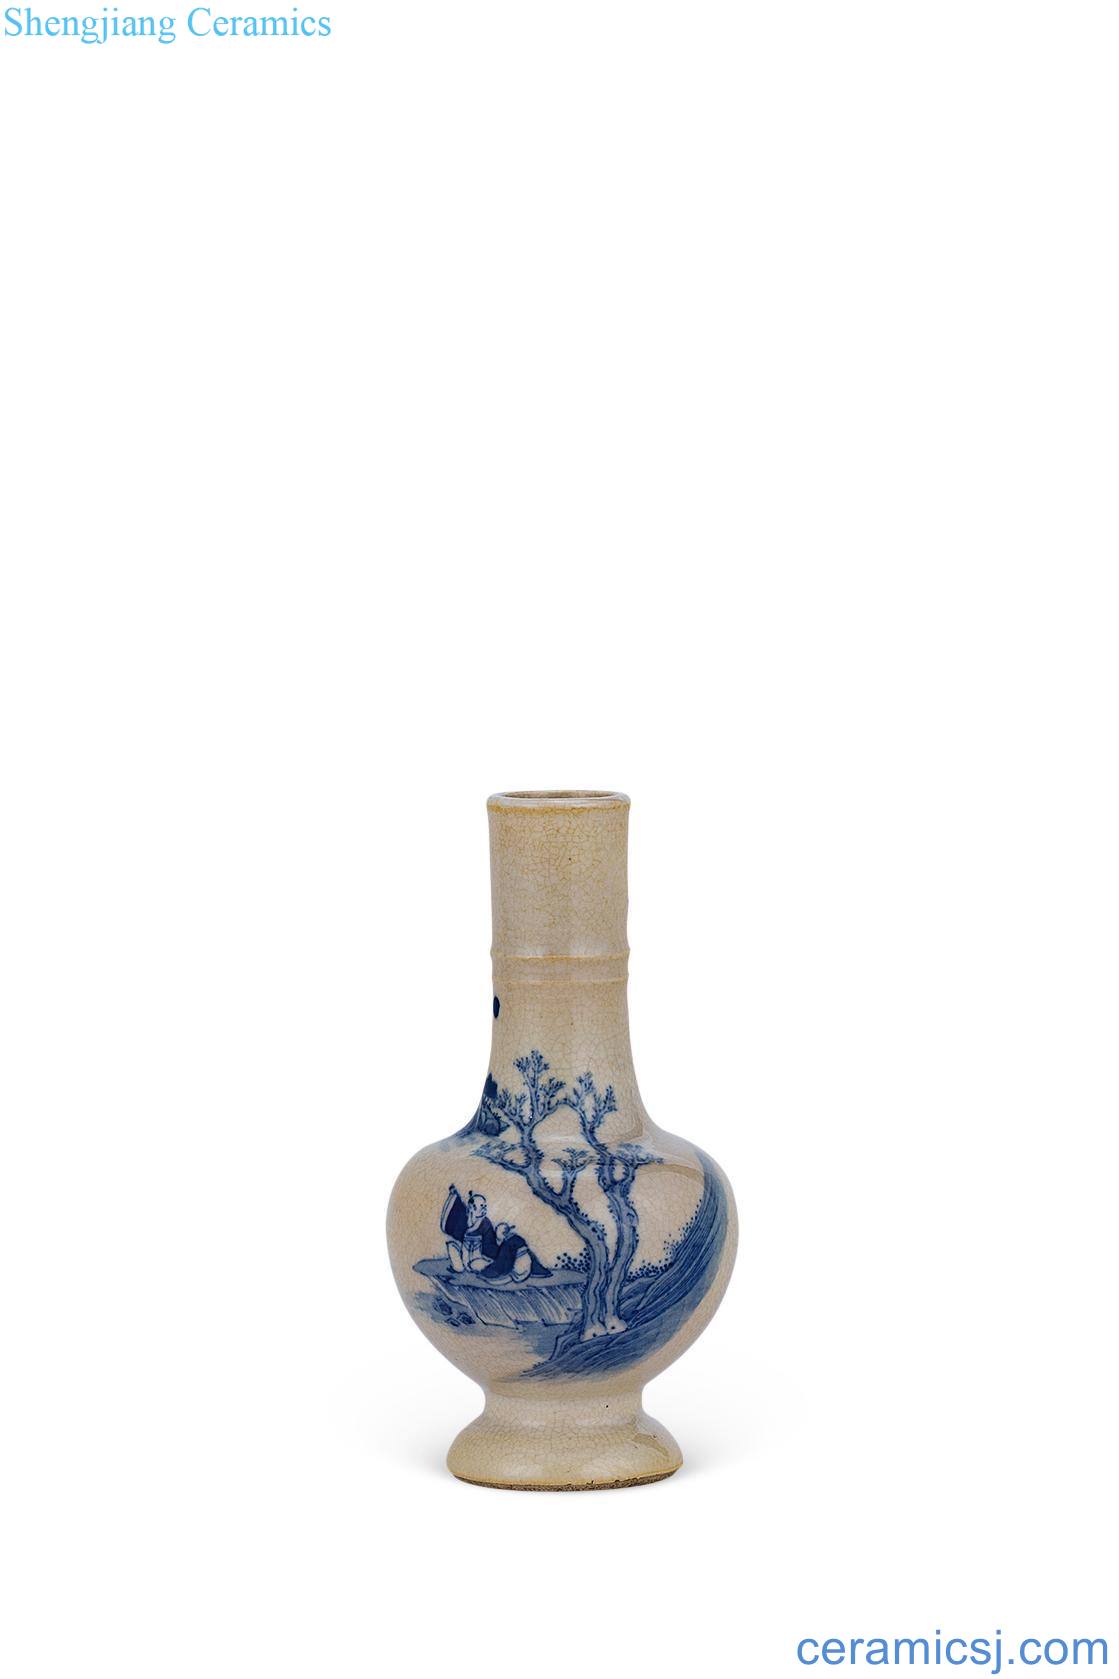 The qing emperor kangxi Blue and white landscape character figure the flask